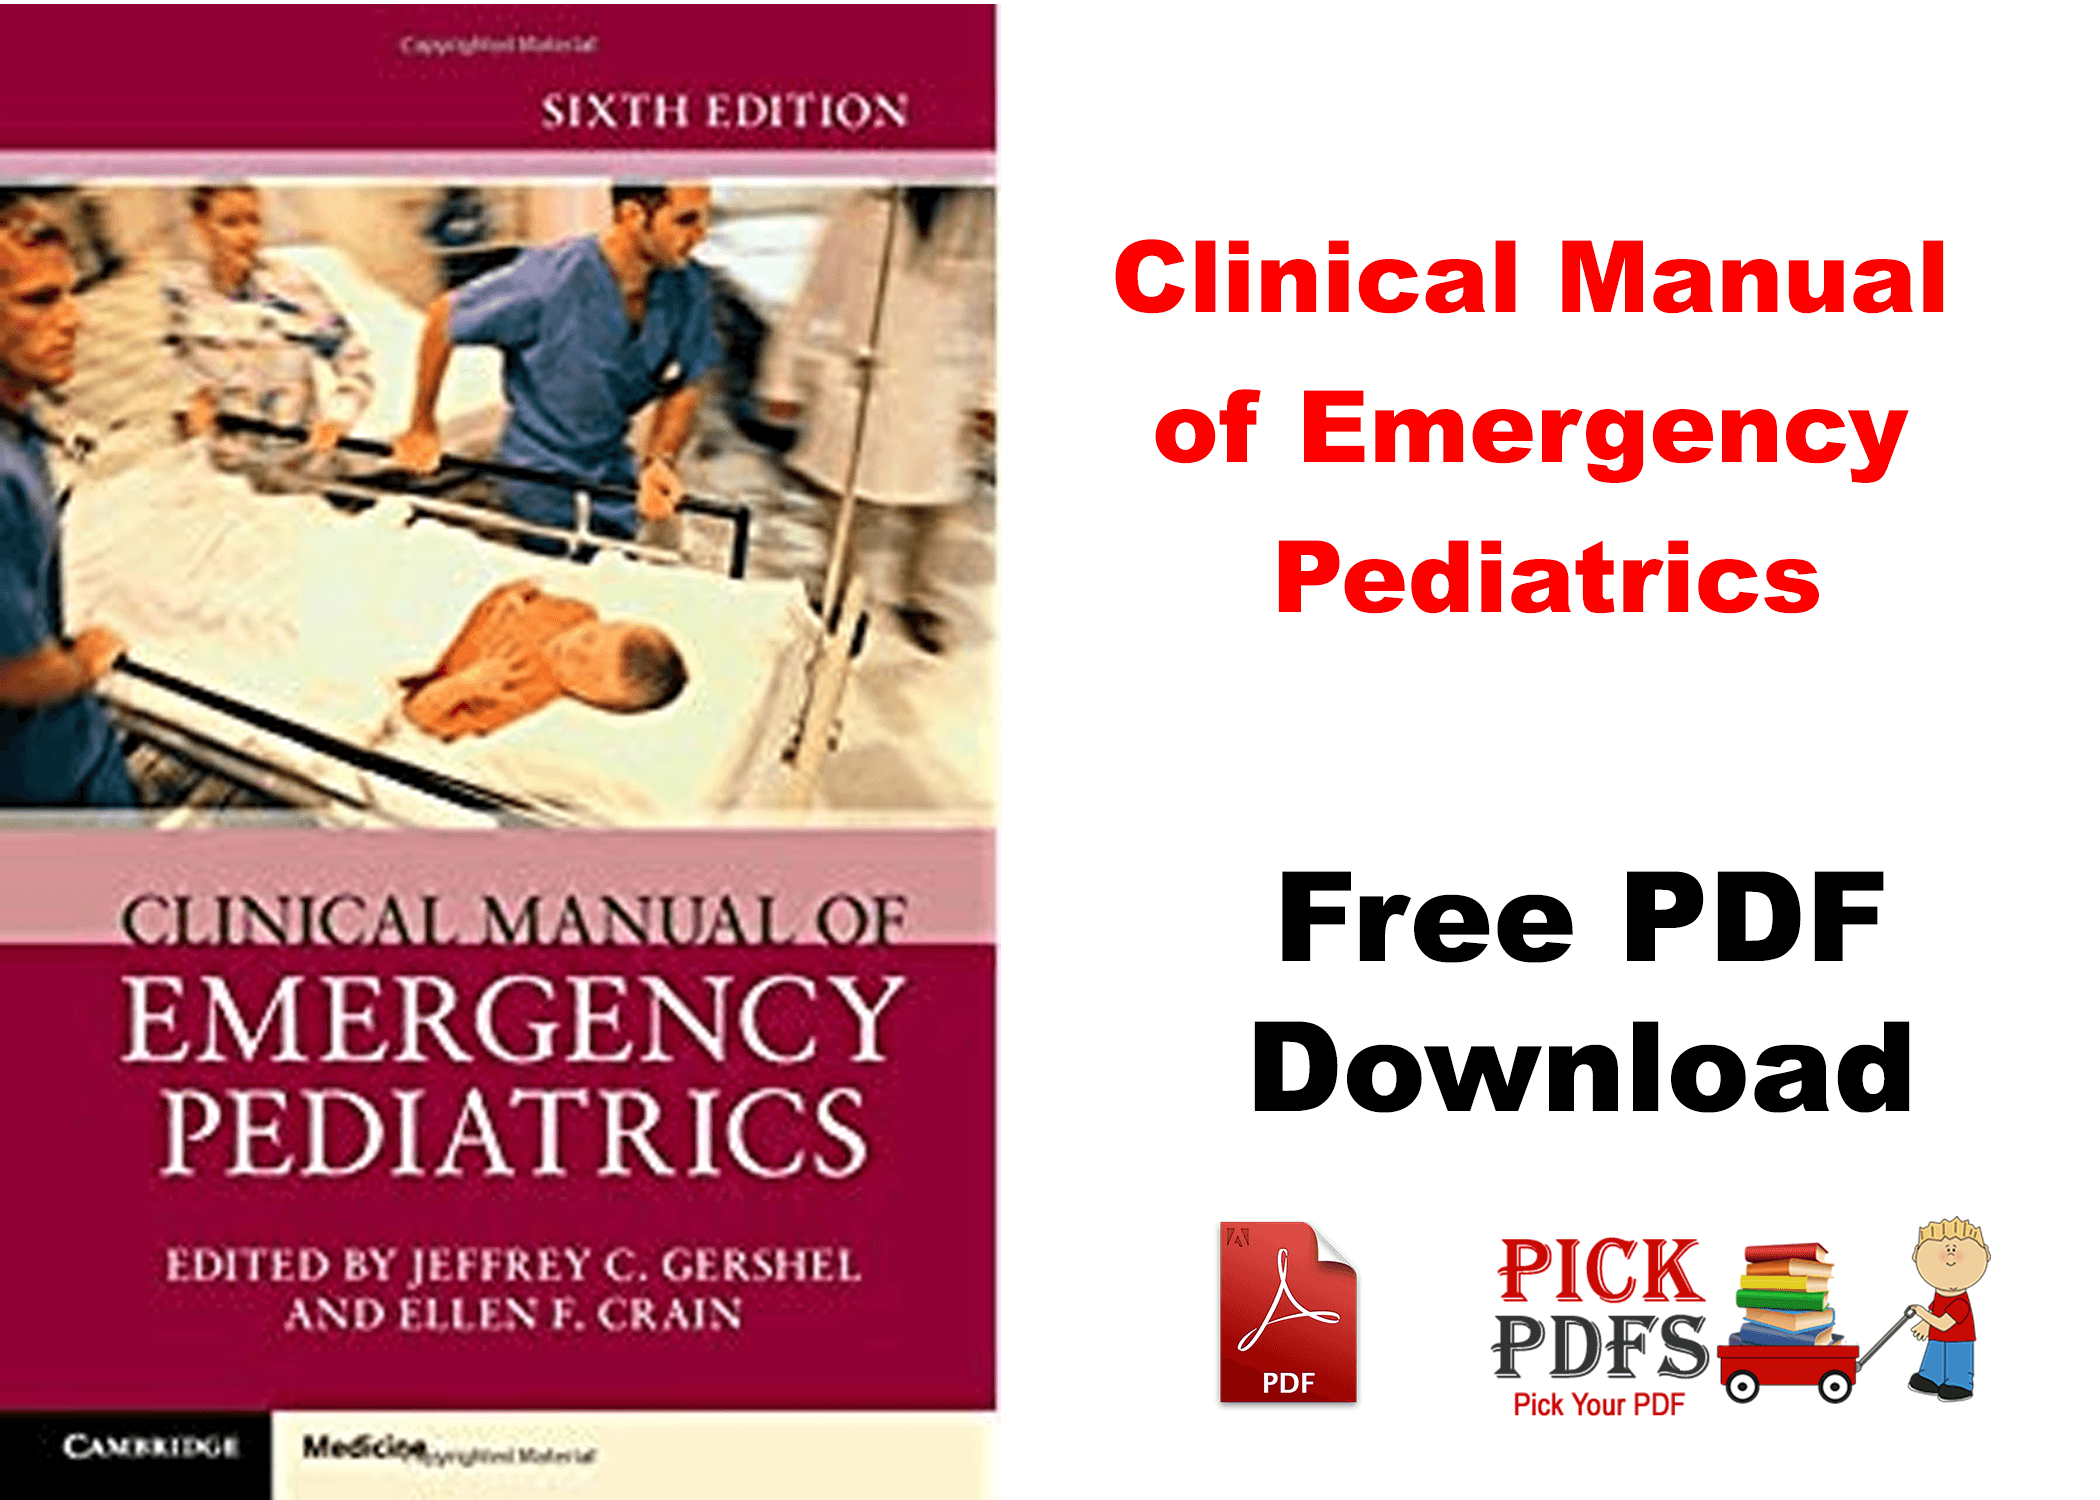 https://pickpdfs.com/clinical-manual-of-emergency-pediatrics-6th-edition-free-book-download/